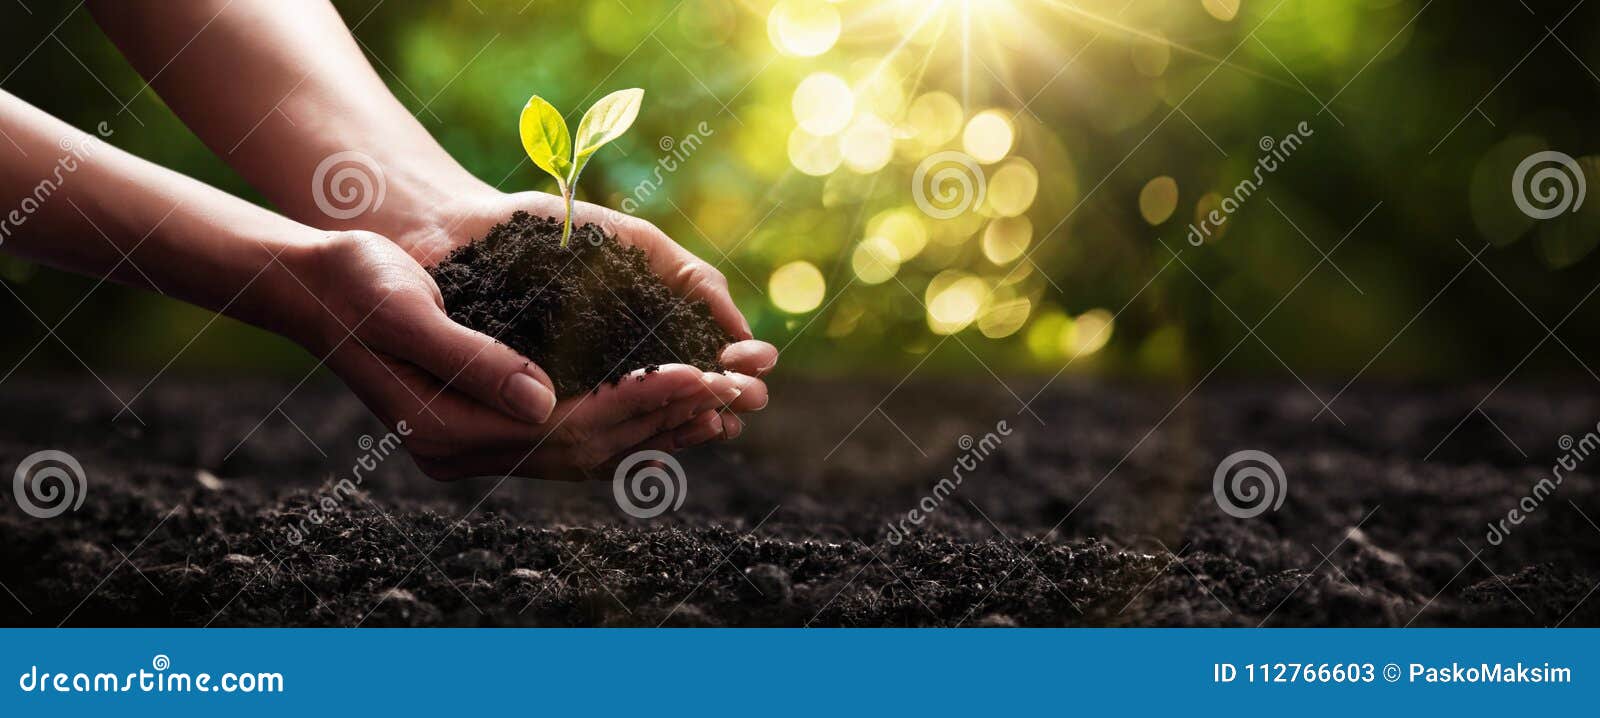 plant in hands. ecology concept. nature background